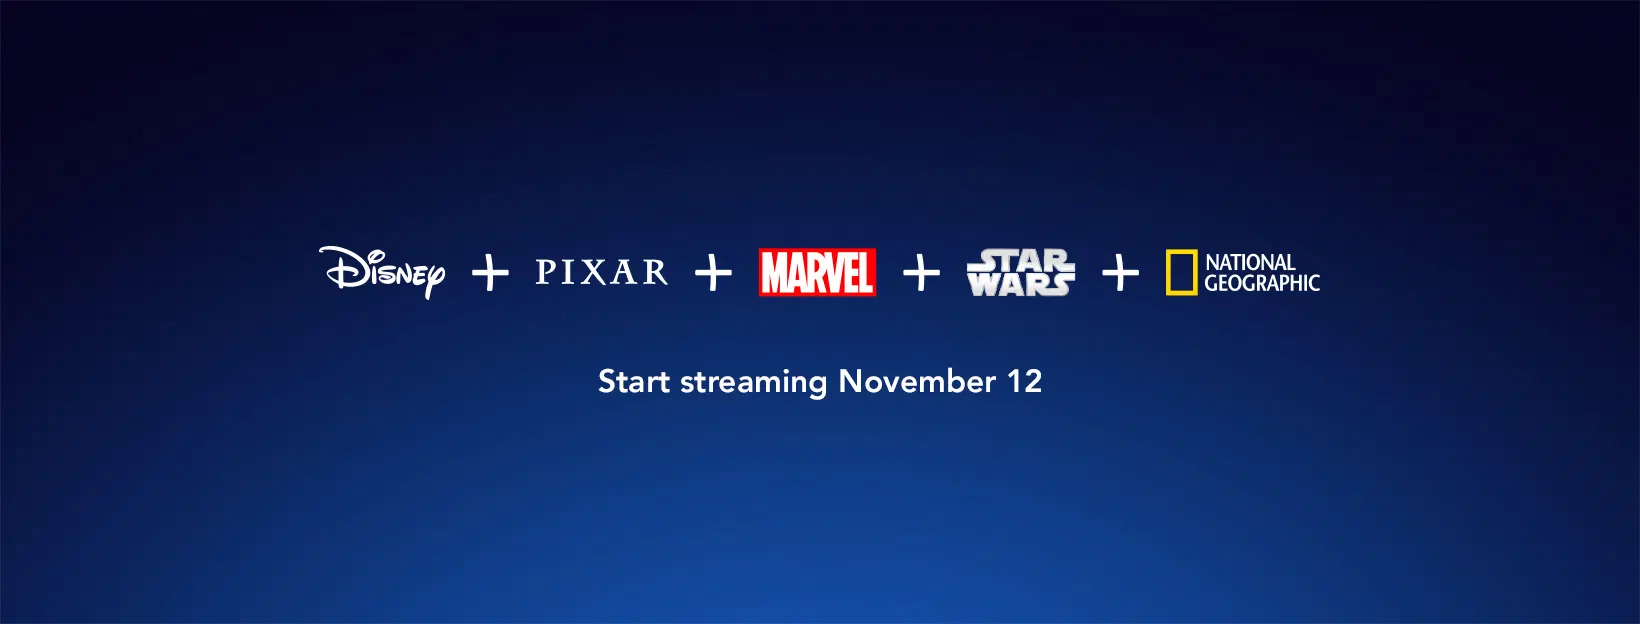 Disney+ video streaming service to launch in Canada this November!